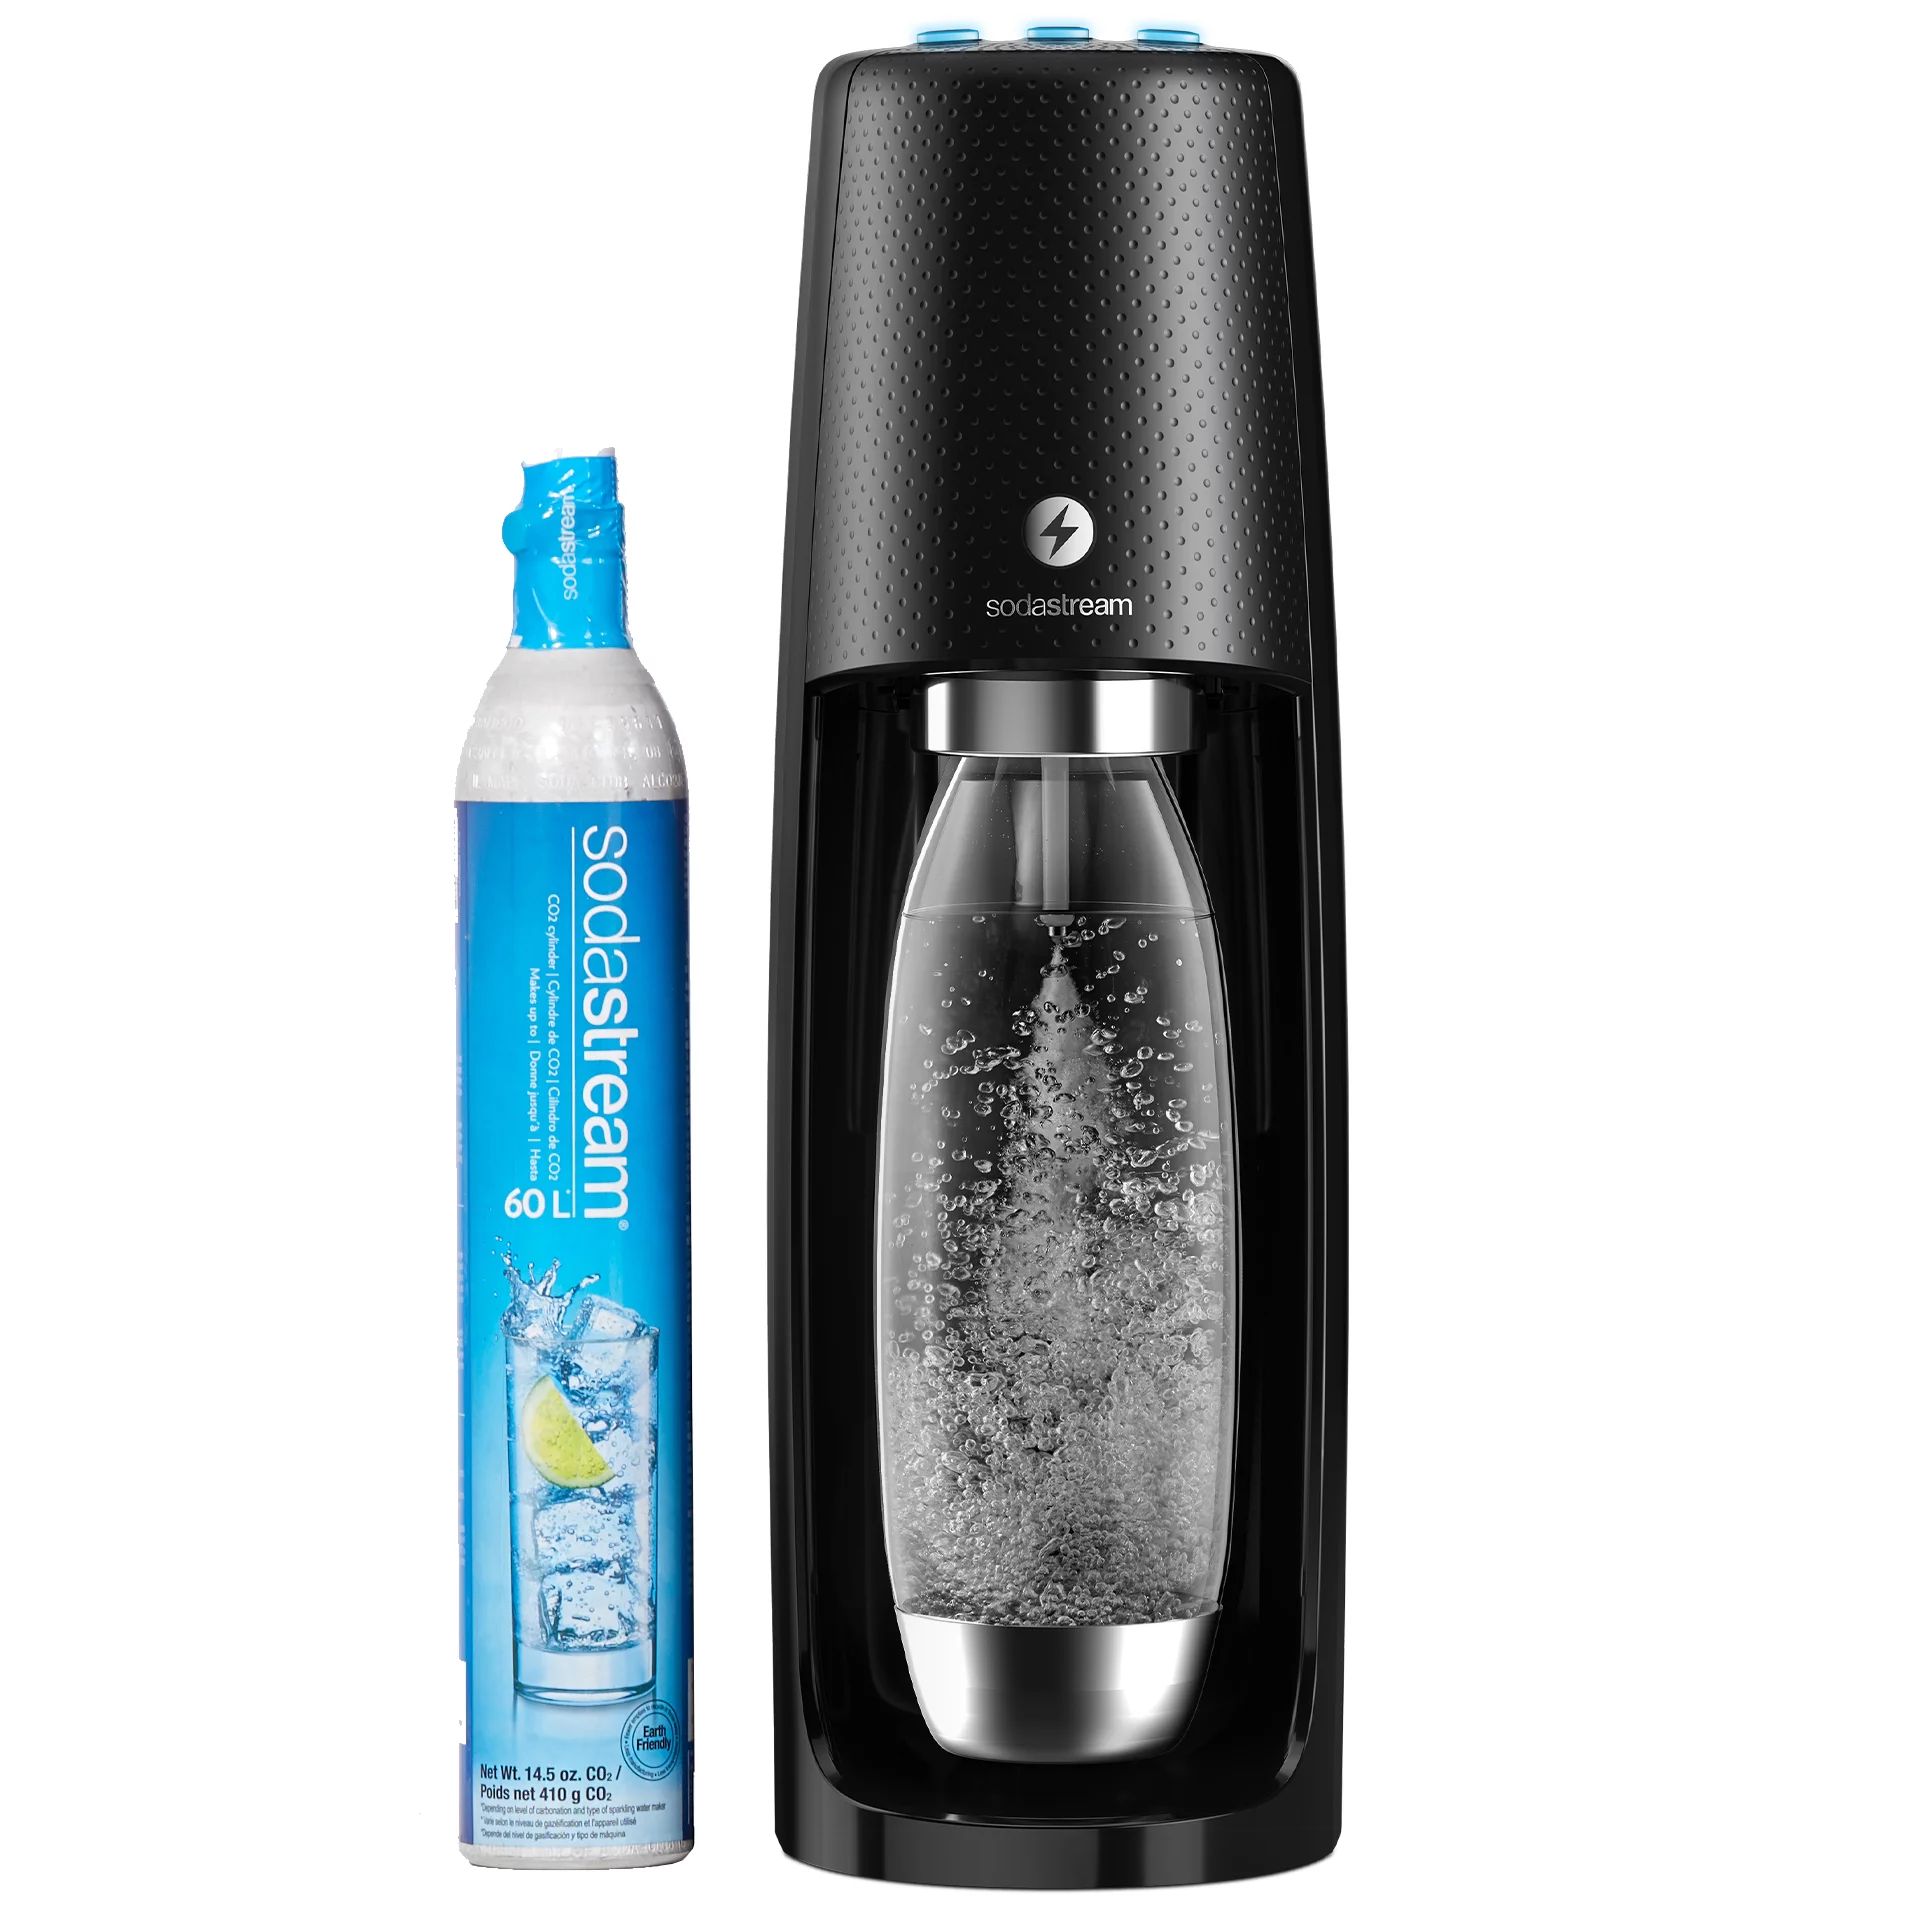 SodaStream One Touch Electric Sparkling Water Maker Kit - Walmart.com | Walmart (US)